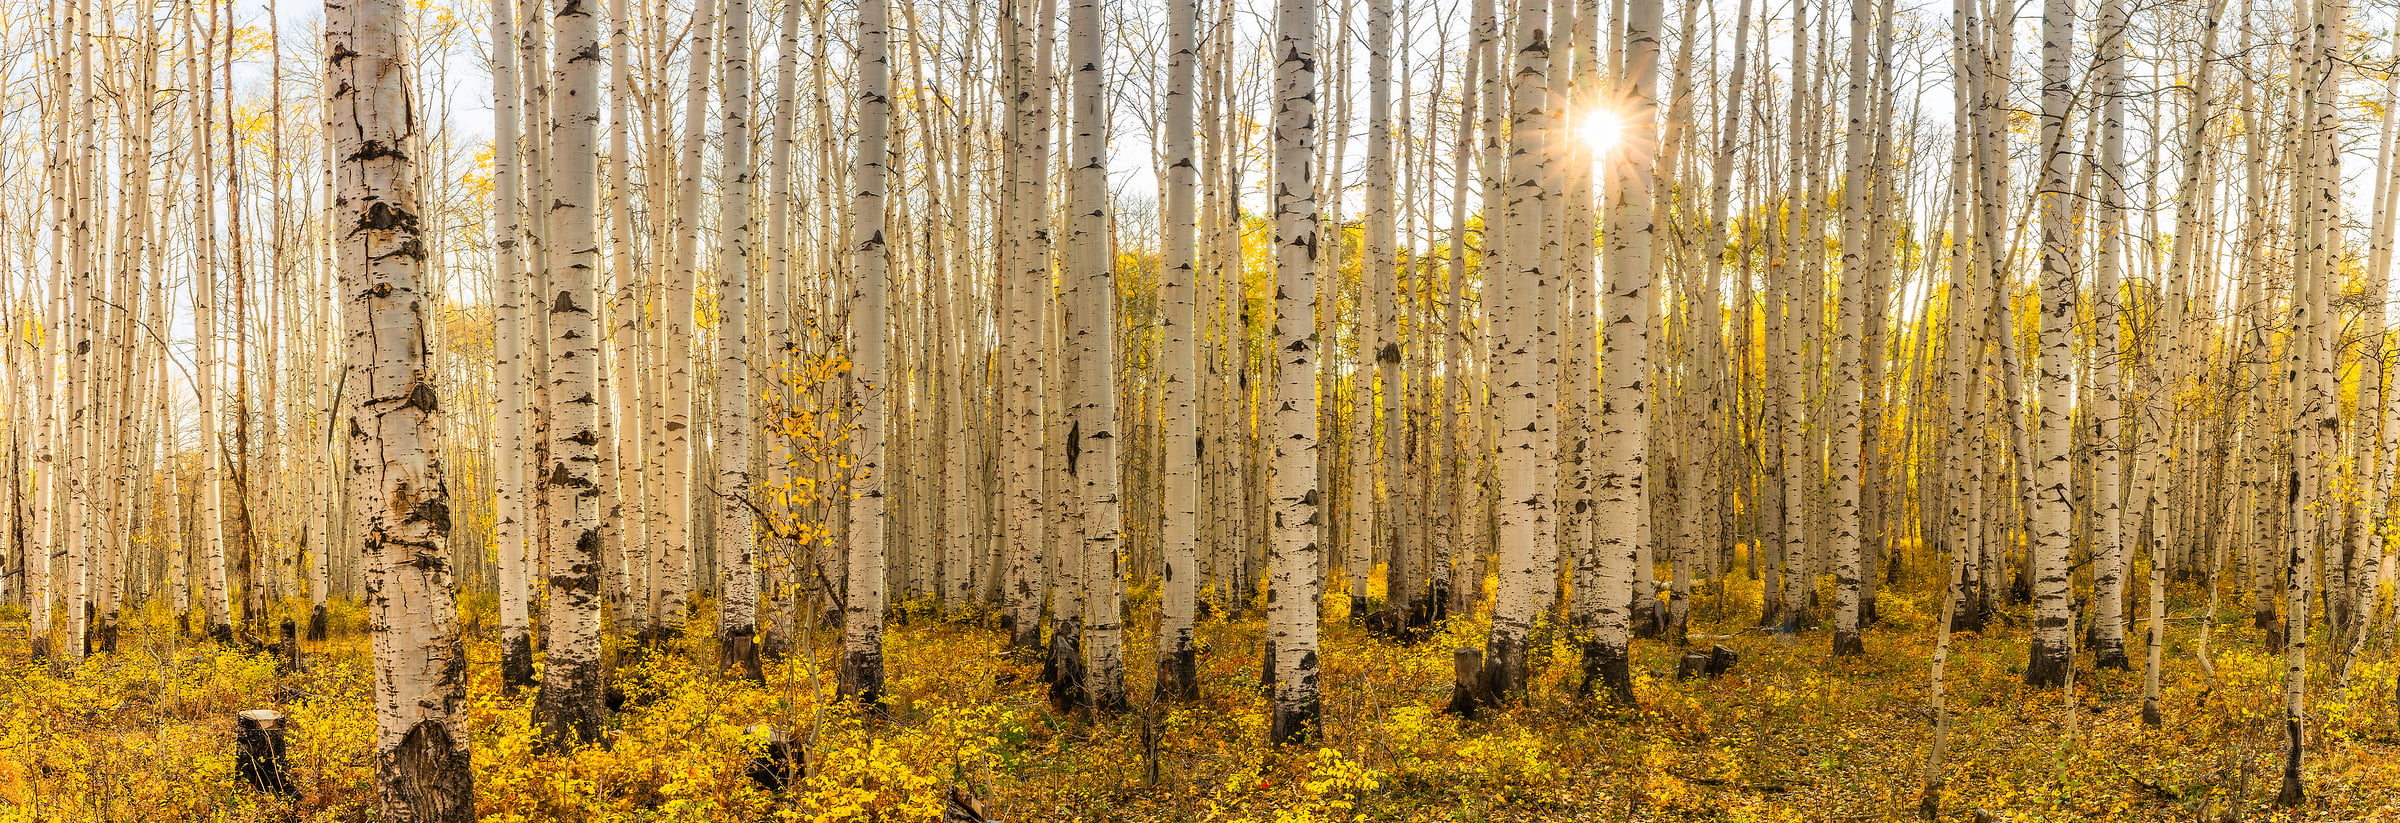 109 megapixels! A very high resolution, large-format VAST photo print of aspen trees in autumn with the sun; nature photograph created by Phillip Noll in Mancos, Colorado.